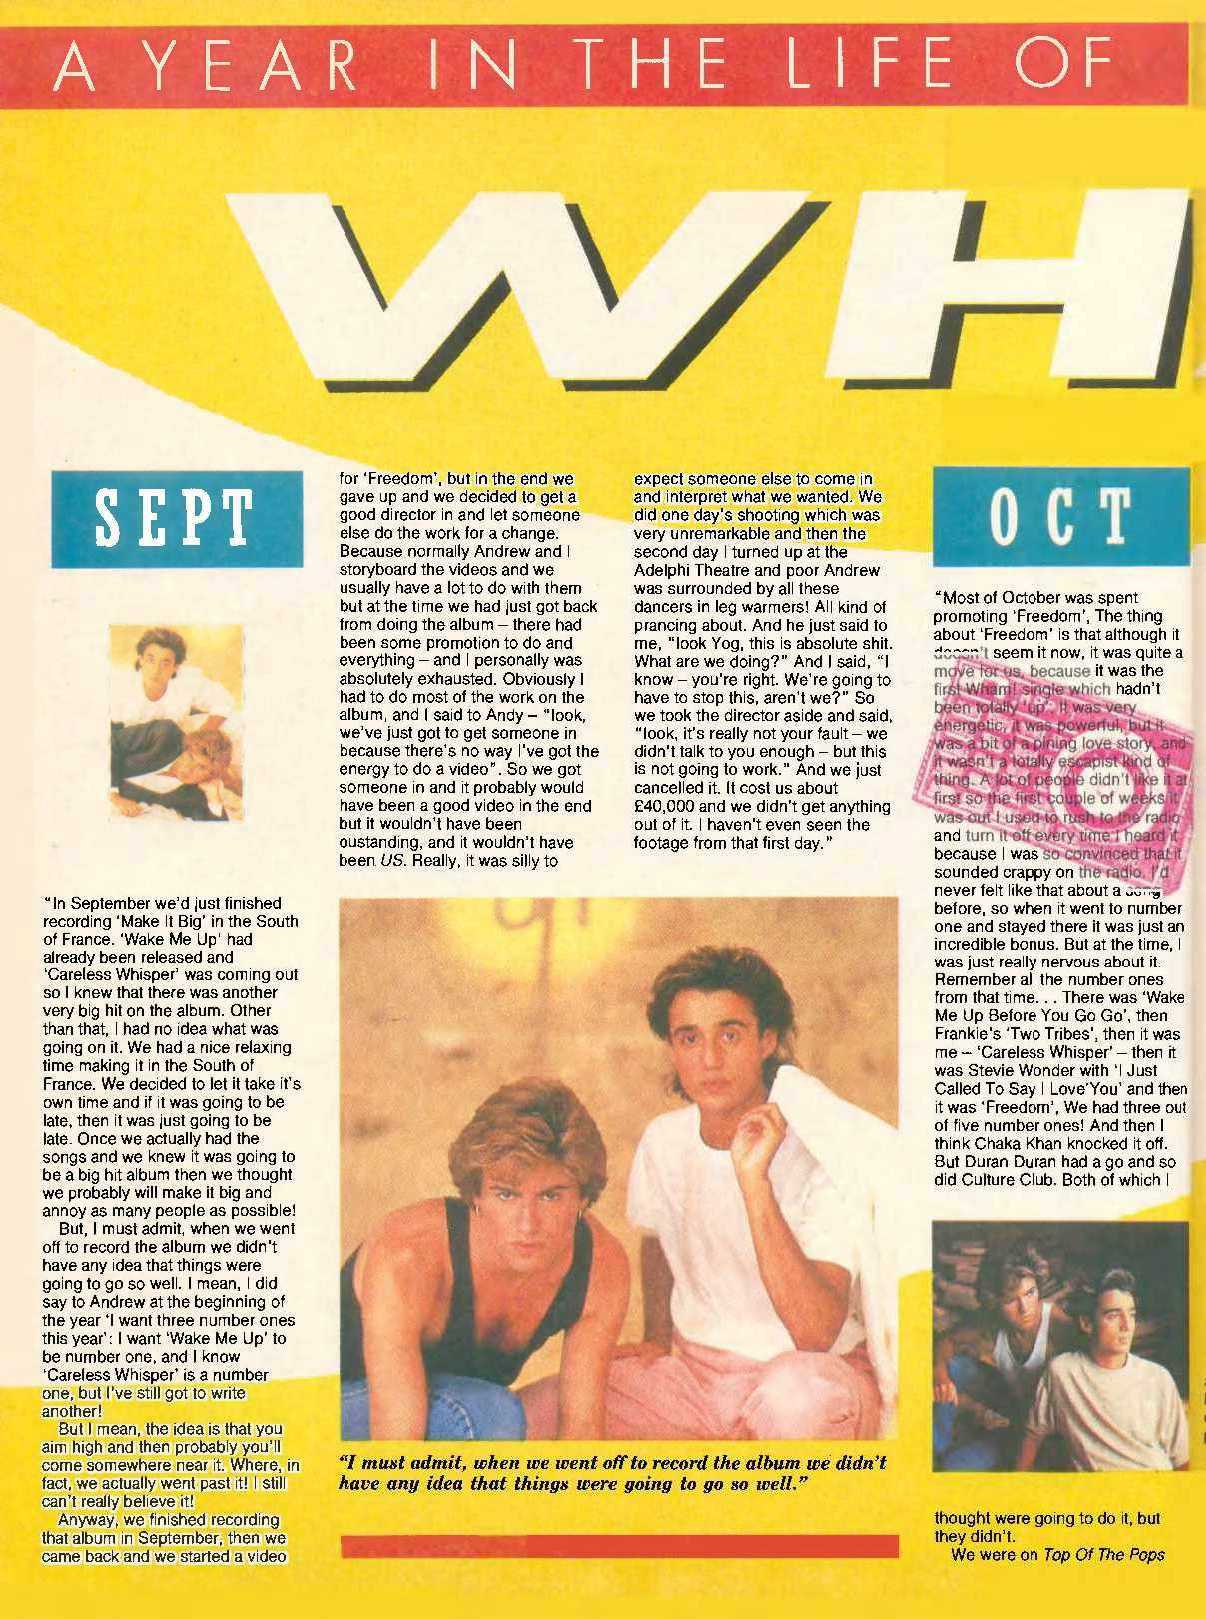 A Year in the Life of Wham! as Told by George Michael (Smash Hits Yearbook, 1986)